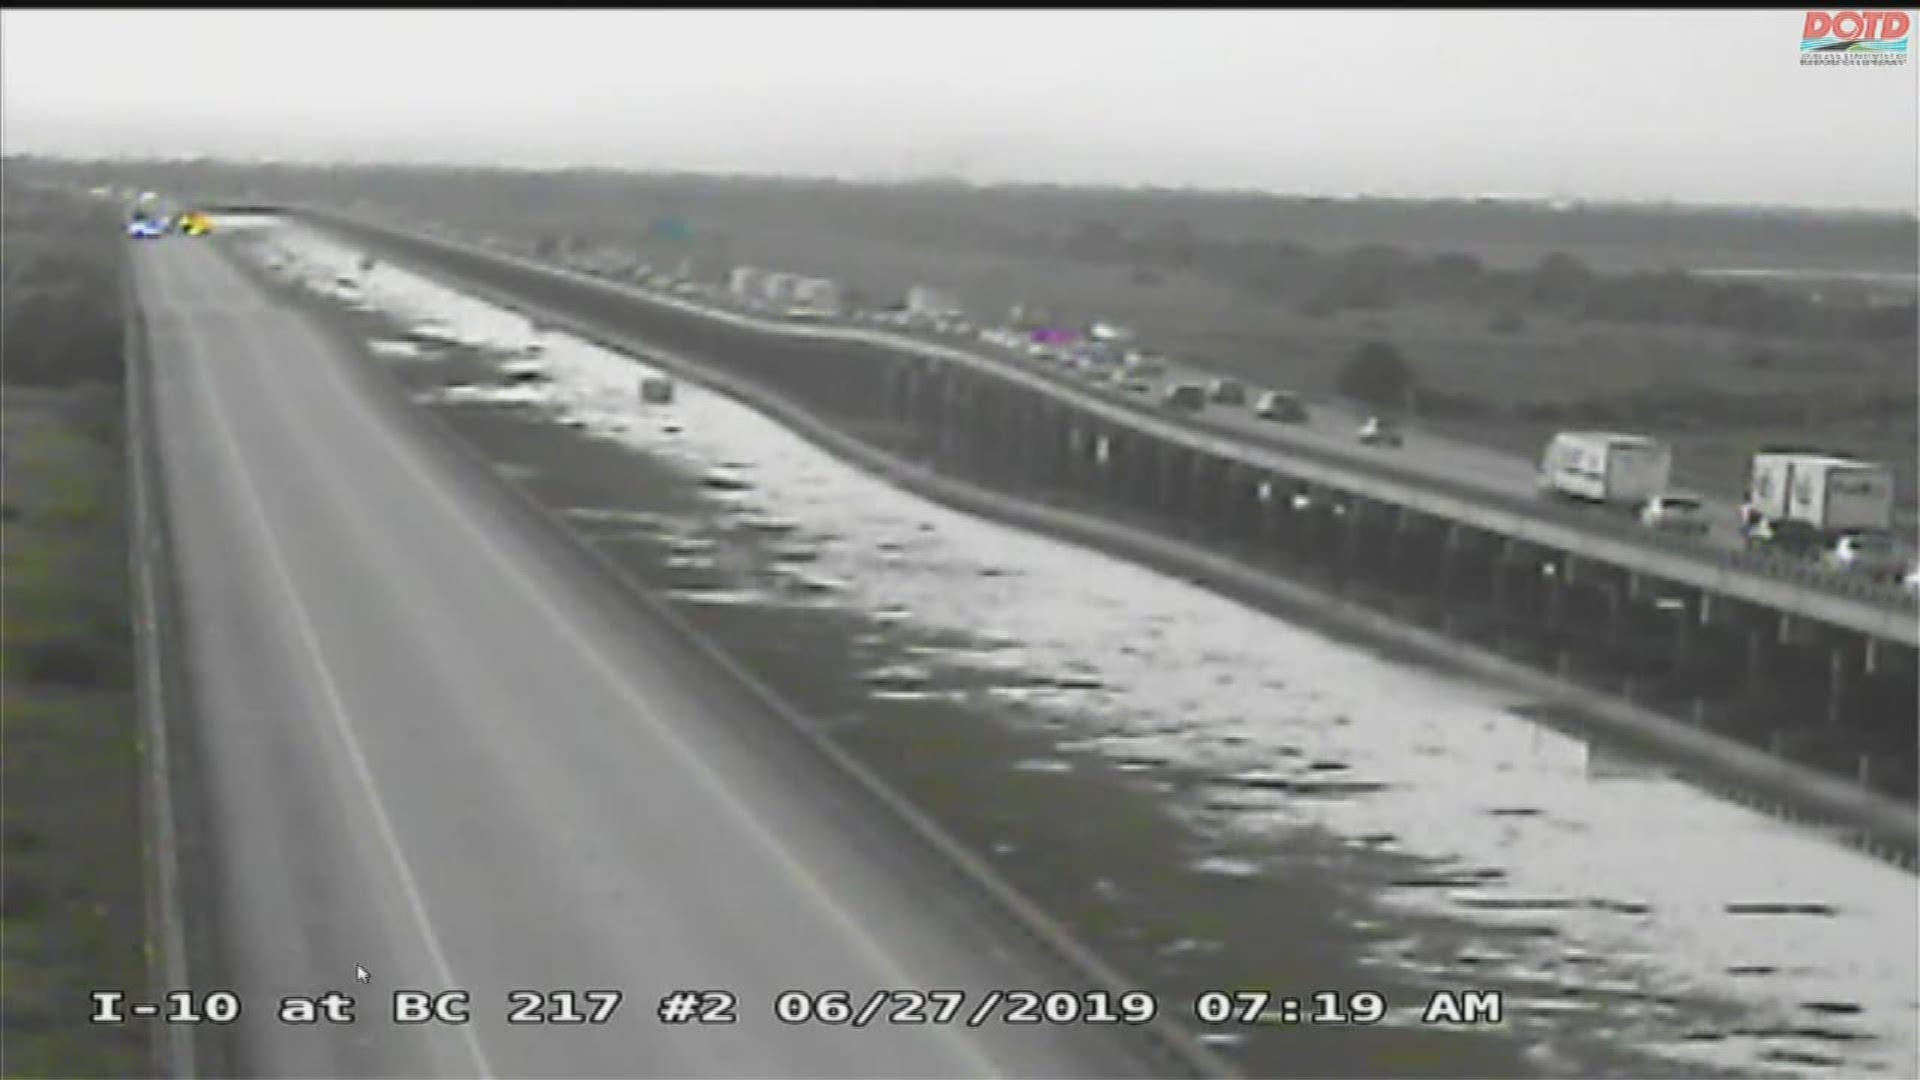 Burning cars on Bonnet Carre Spillway stopping westbound I-10